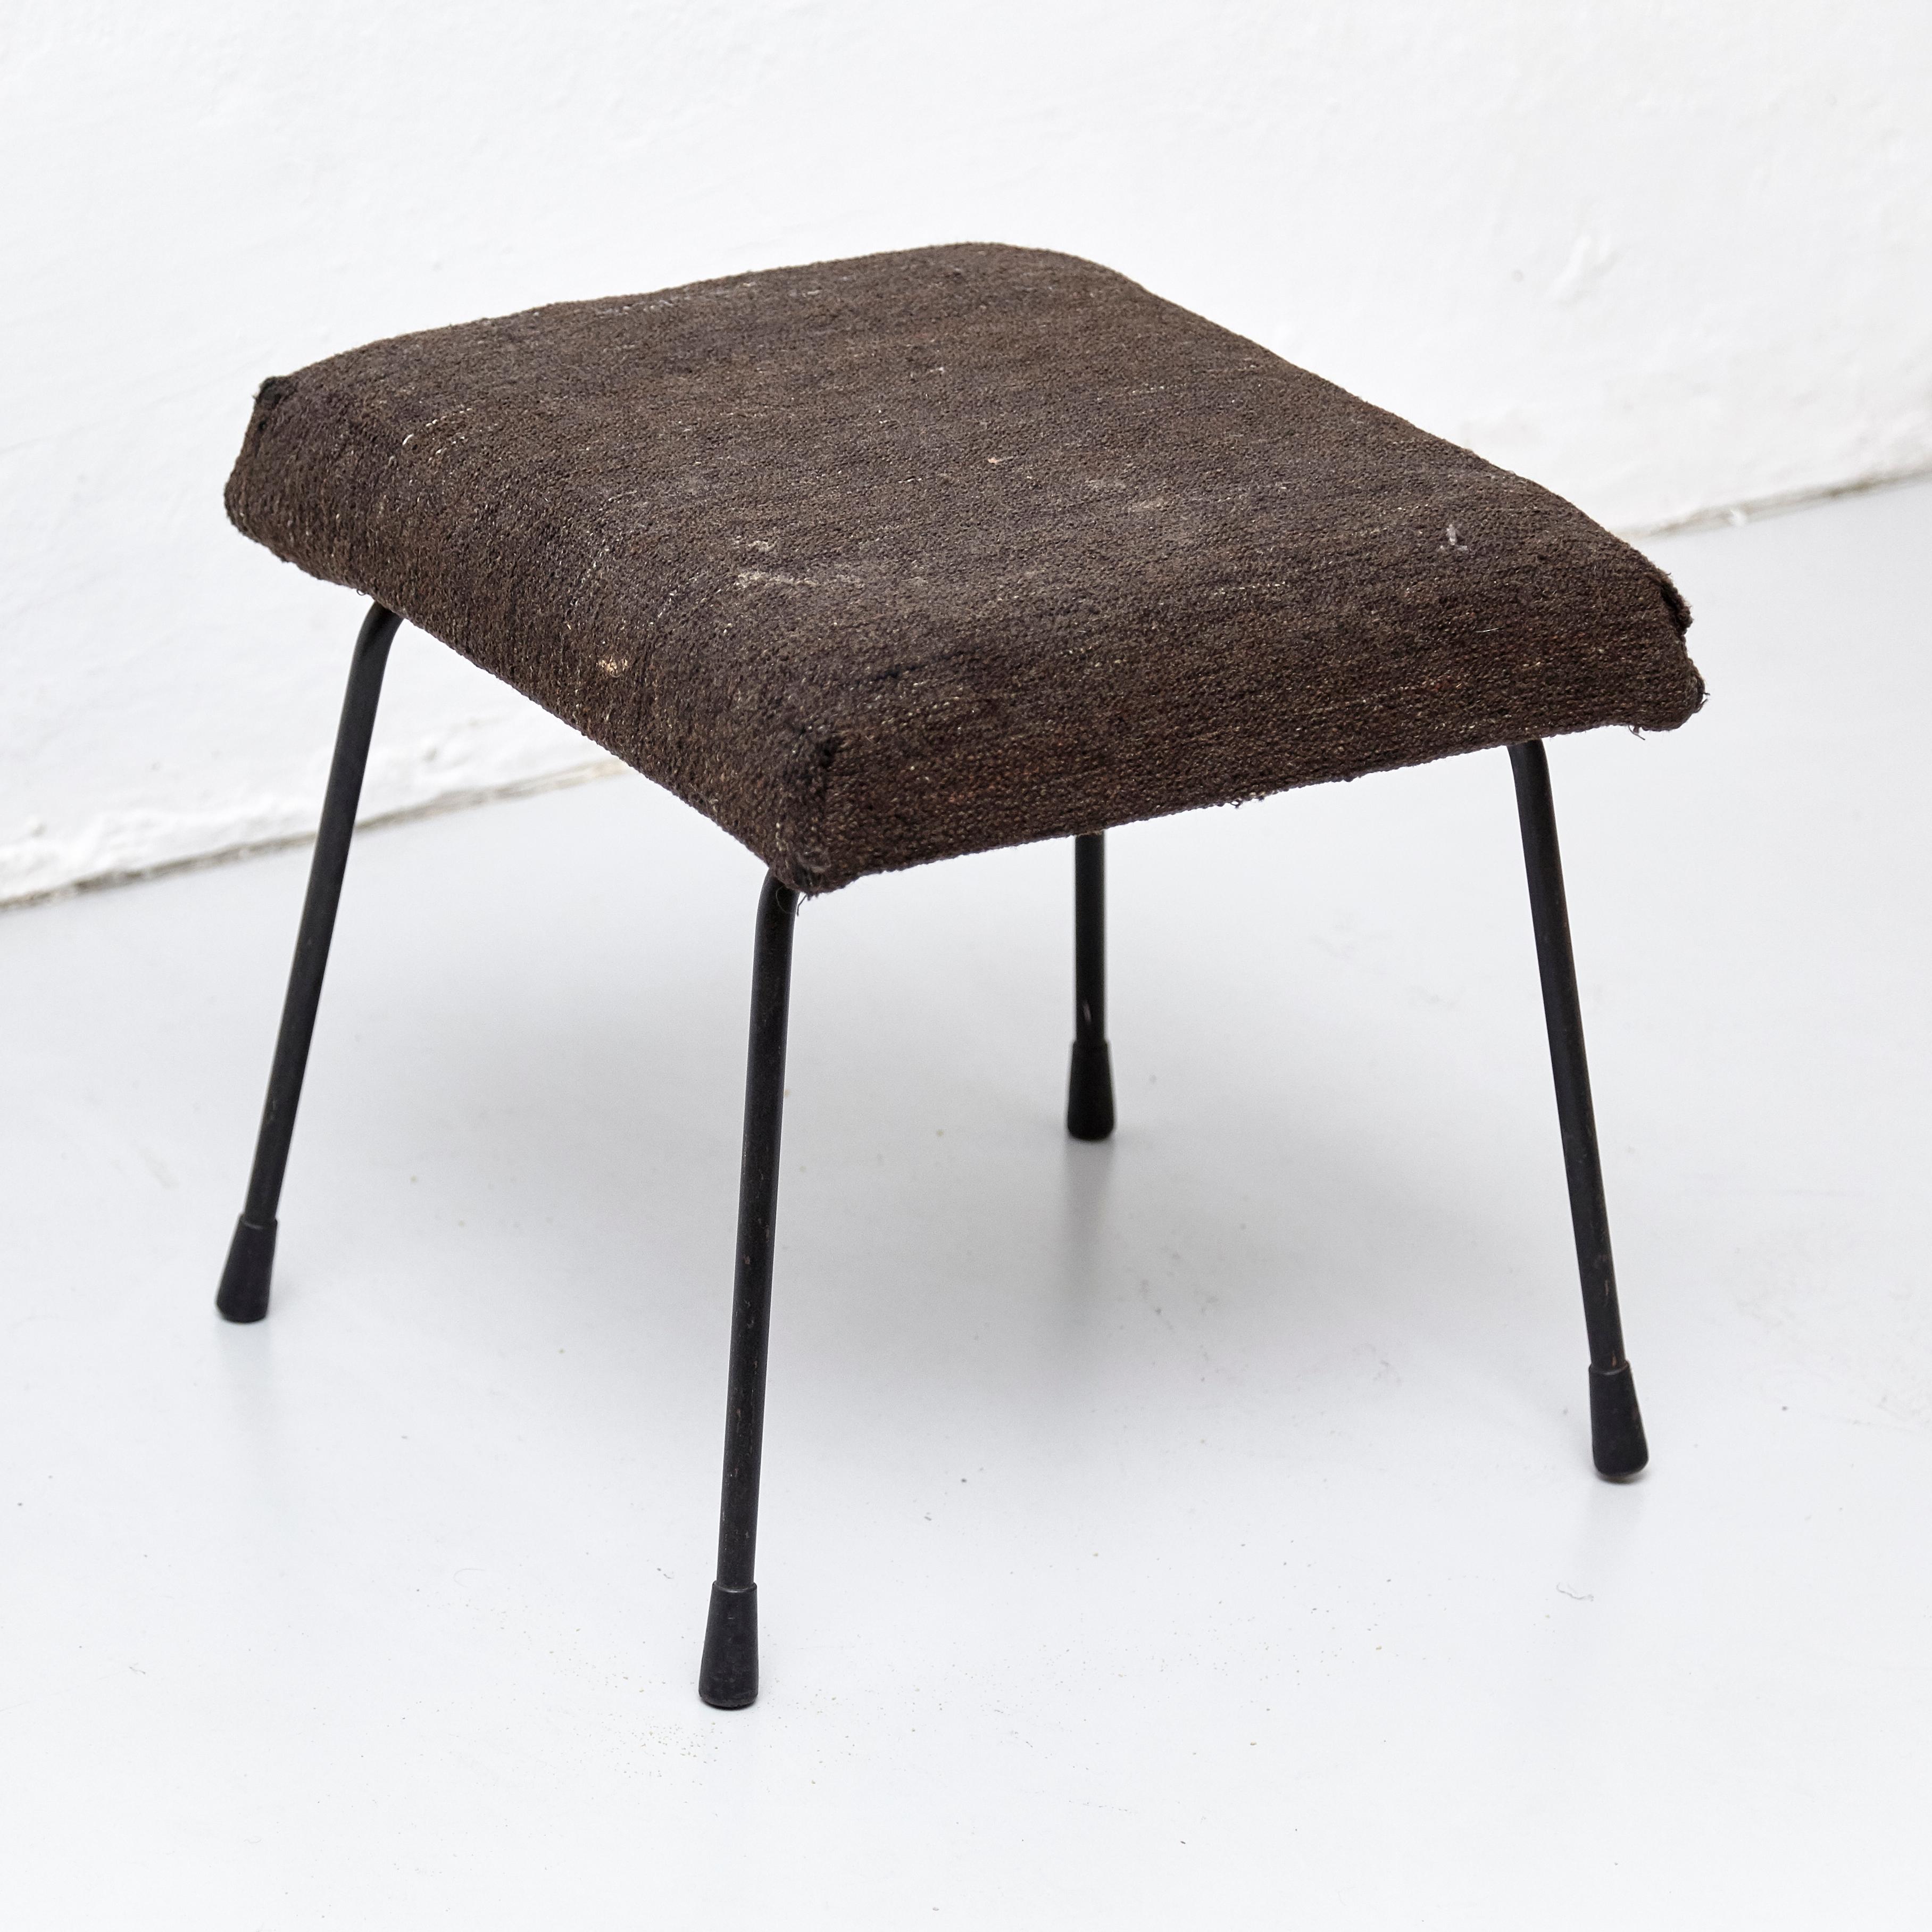 Footstool designed by Wim Rietveld circa 1960 manufactured in Netherlands

In original condition, with minor wear consistent with age and use, preserving a beautiful patina.

Some scratches in the fabric.

 